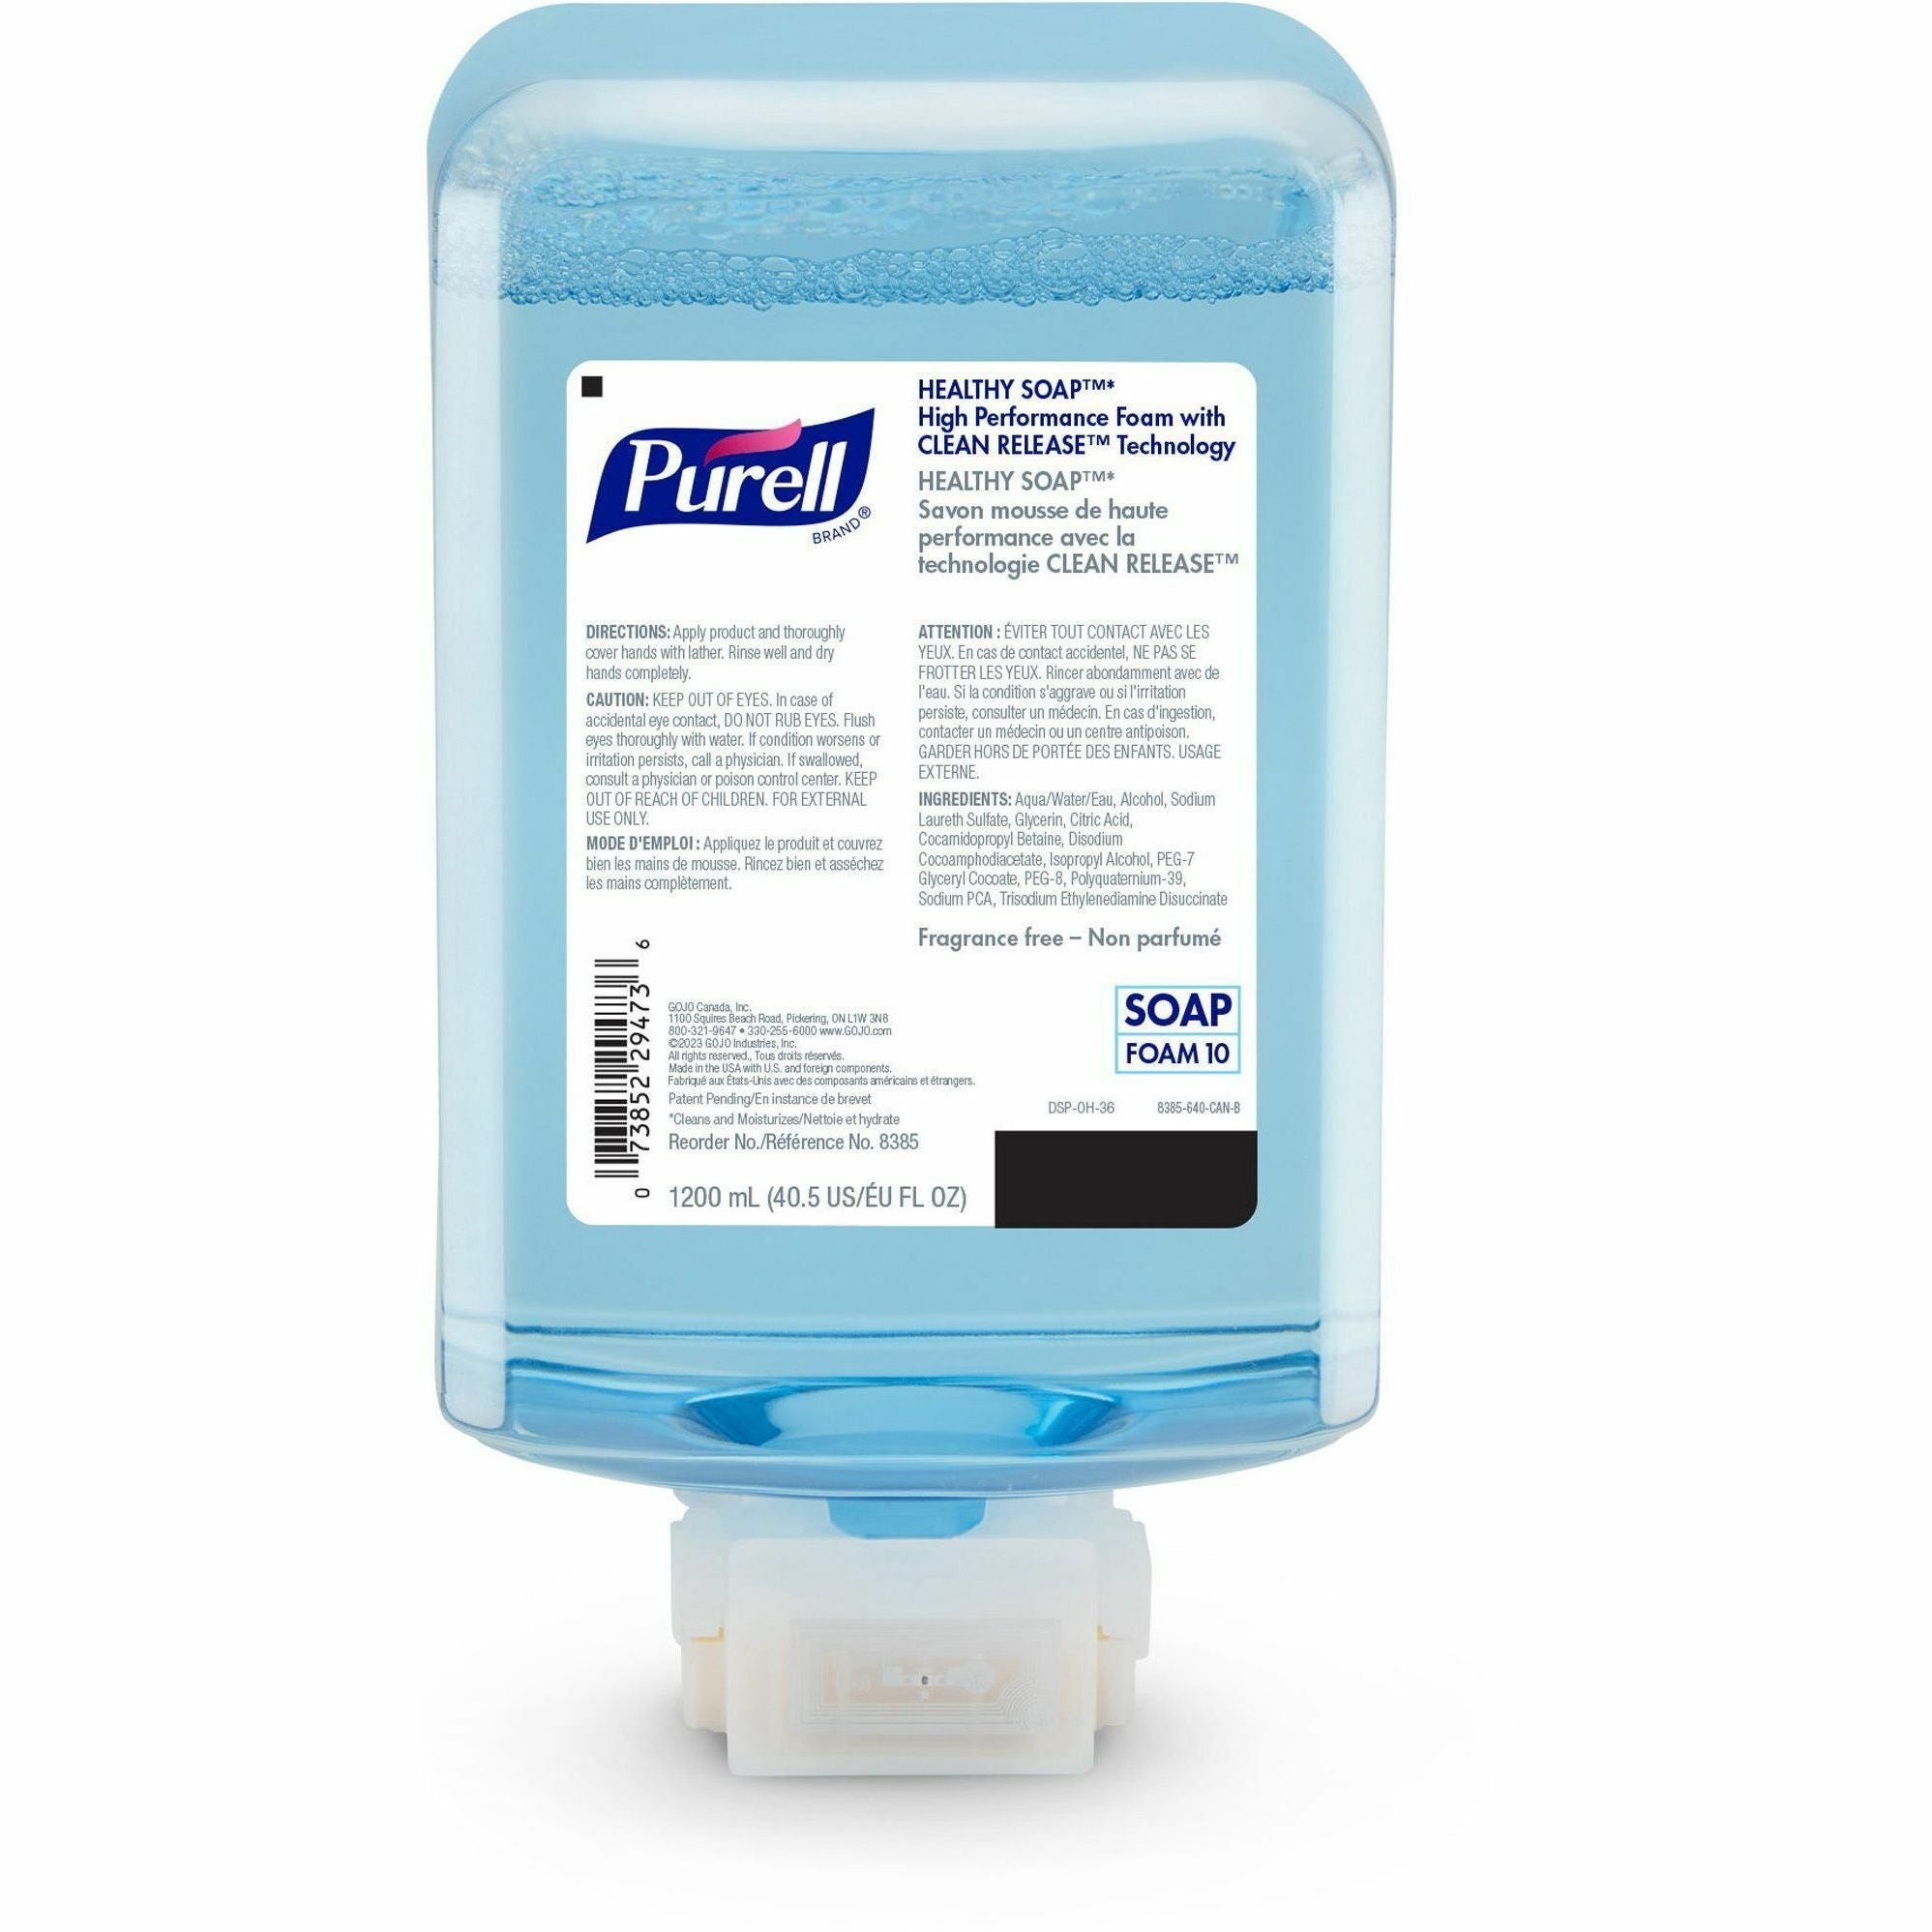 purell-es10-healthy-soap-clean-release-foam-406-fl-oz-1200-ml-touchless-dispenser-kill-germs-dirt-remover-hand-antibacterial-clear-refillable-fragrance-free-non-irritating-preservative-free-2-carton_goj838502 - 2